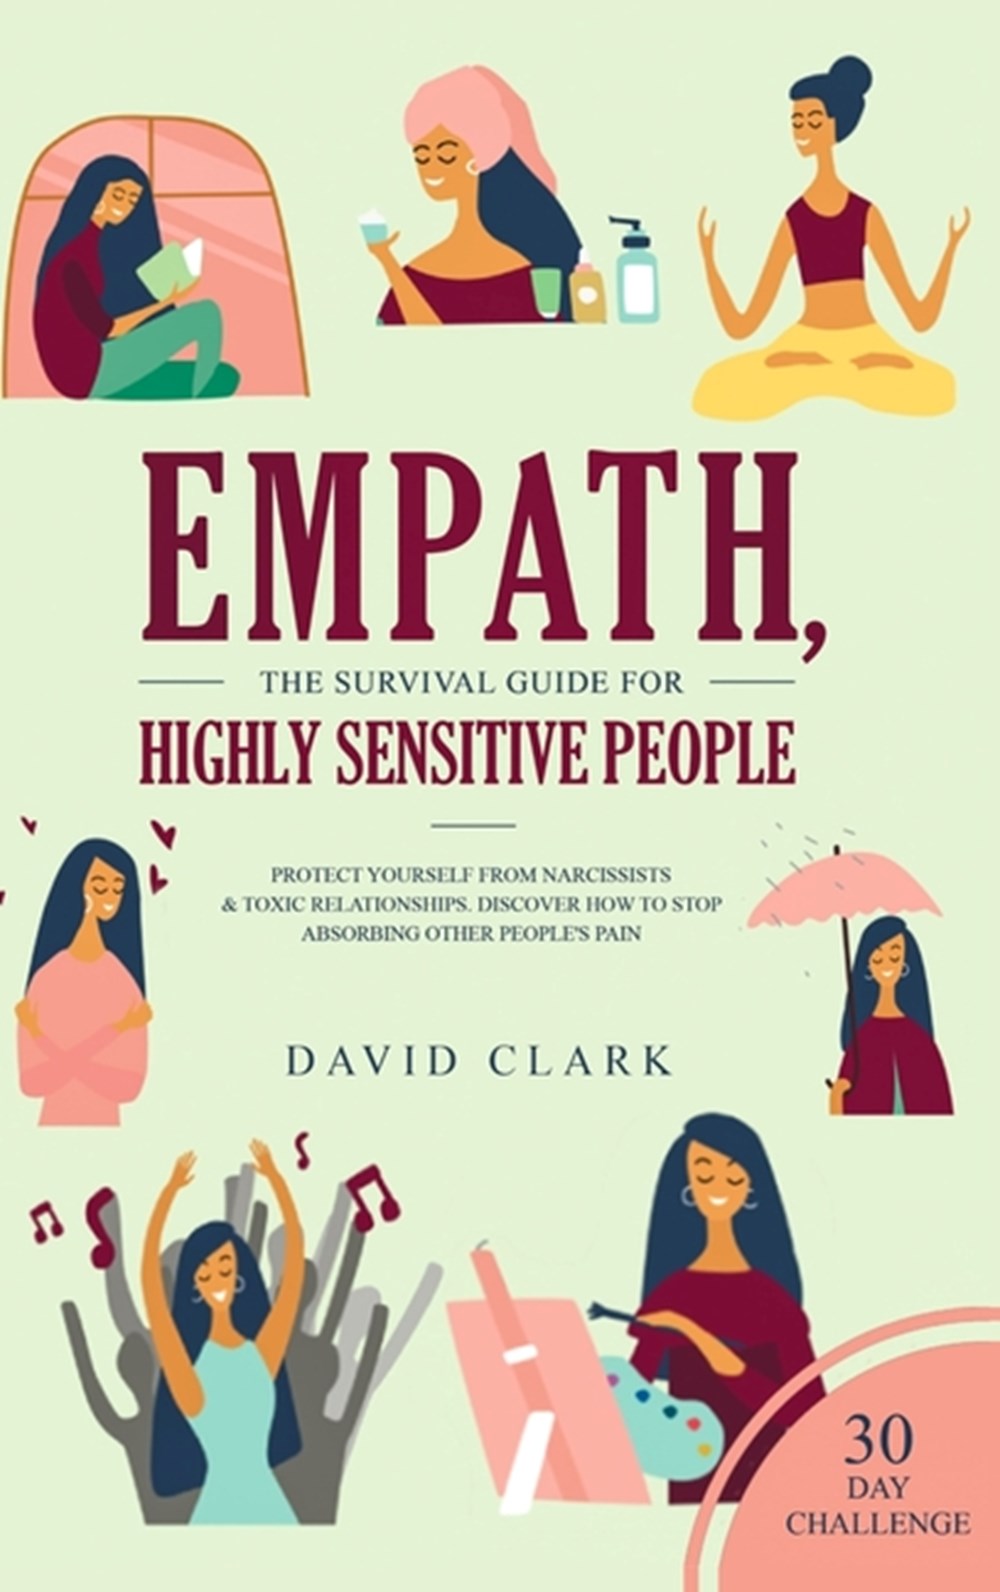 Empath, The Survival Guide for Highly Sensitive People: Protect Yourself From Narcissists & Toxic Re